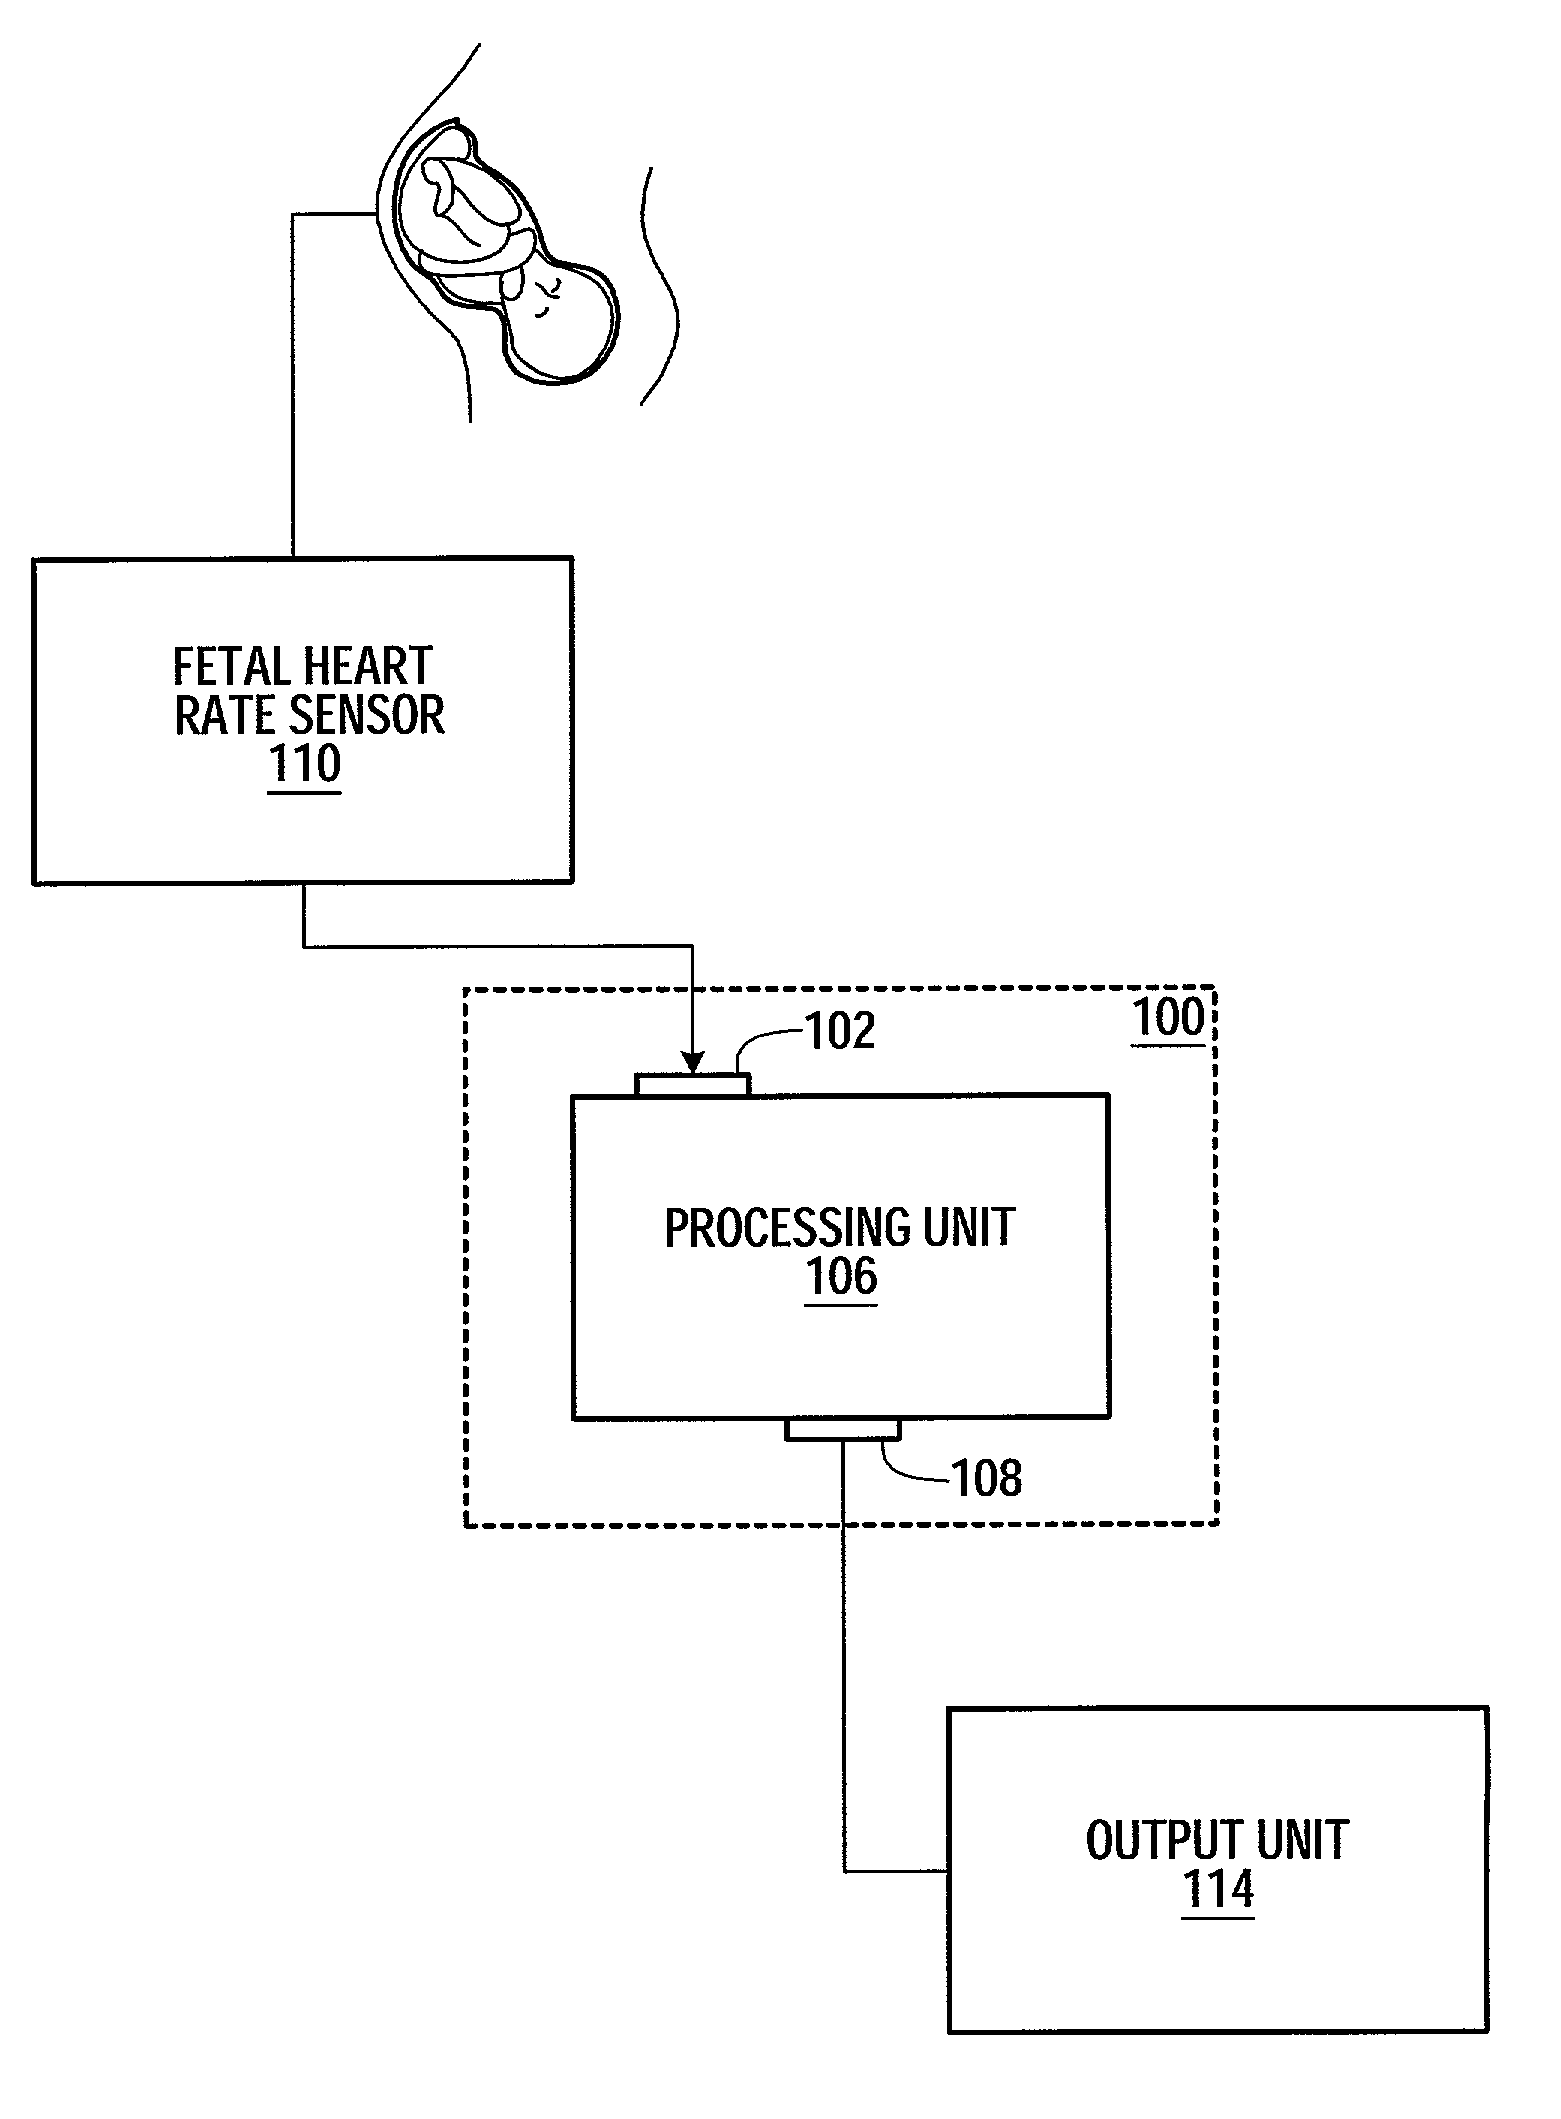 Method and apparatus for monitoring the condition of a fetus